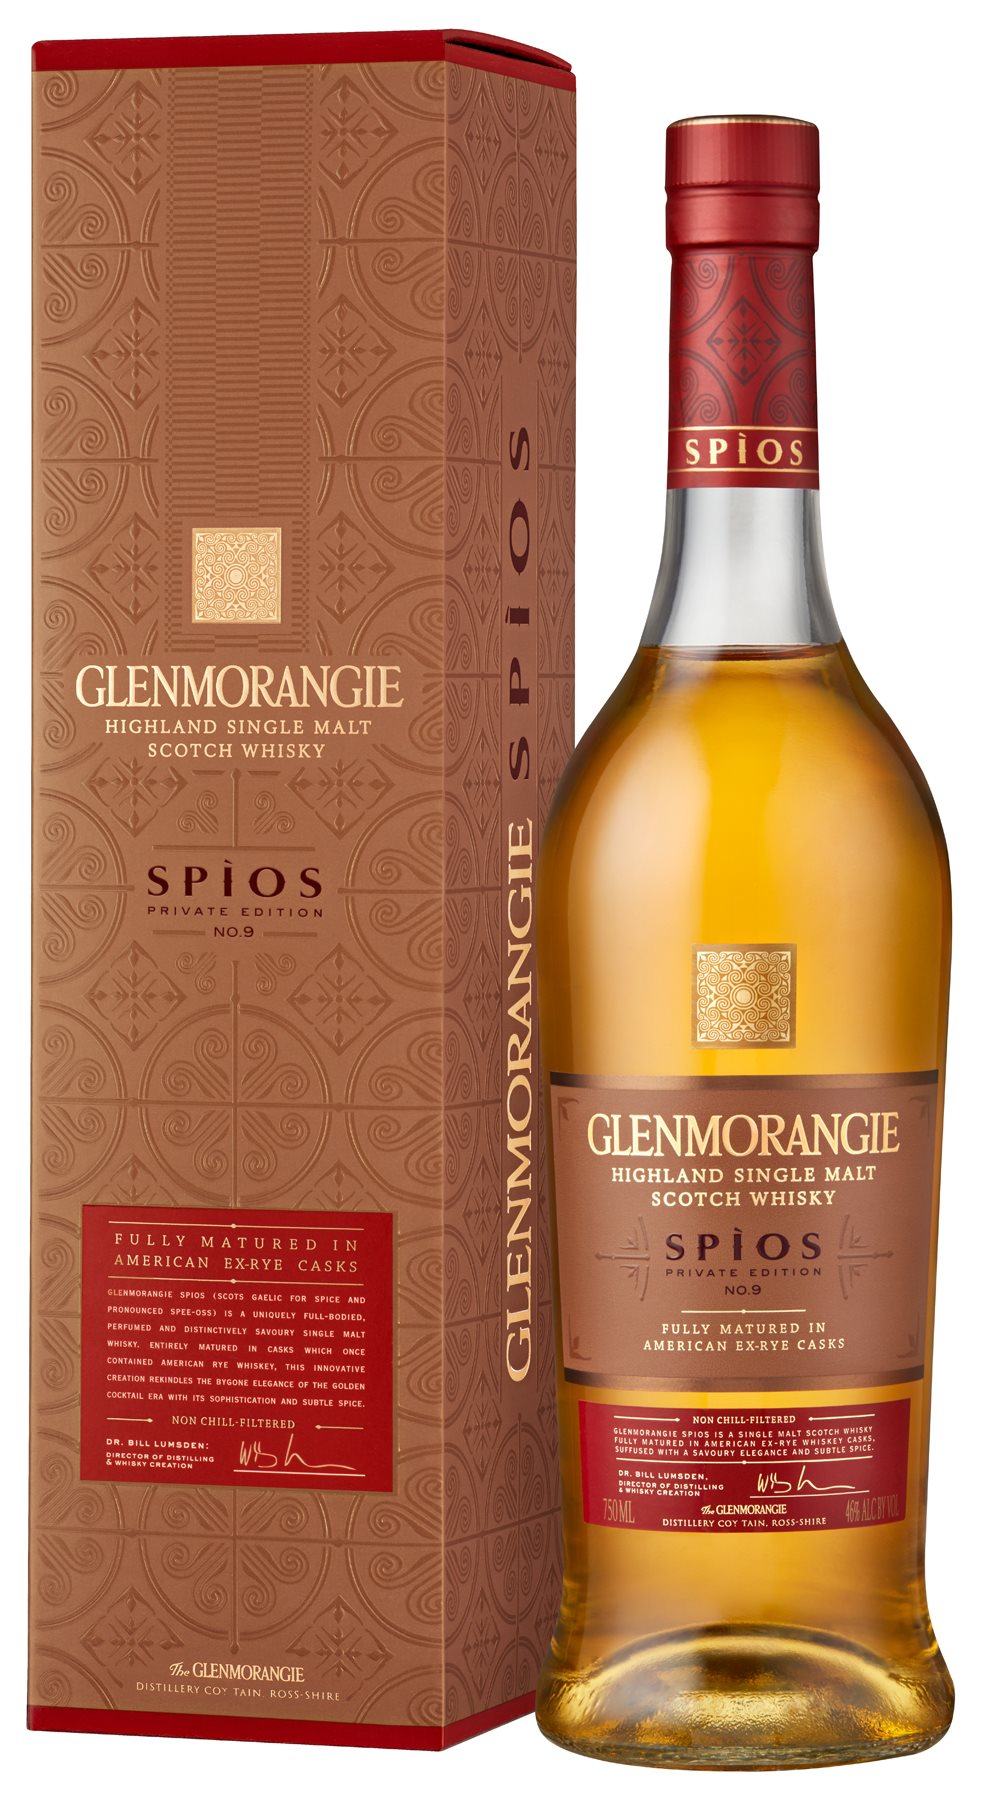 Glenmorangie Private Edition 9 Spios_Bottle and Pack on transparent background